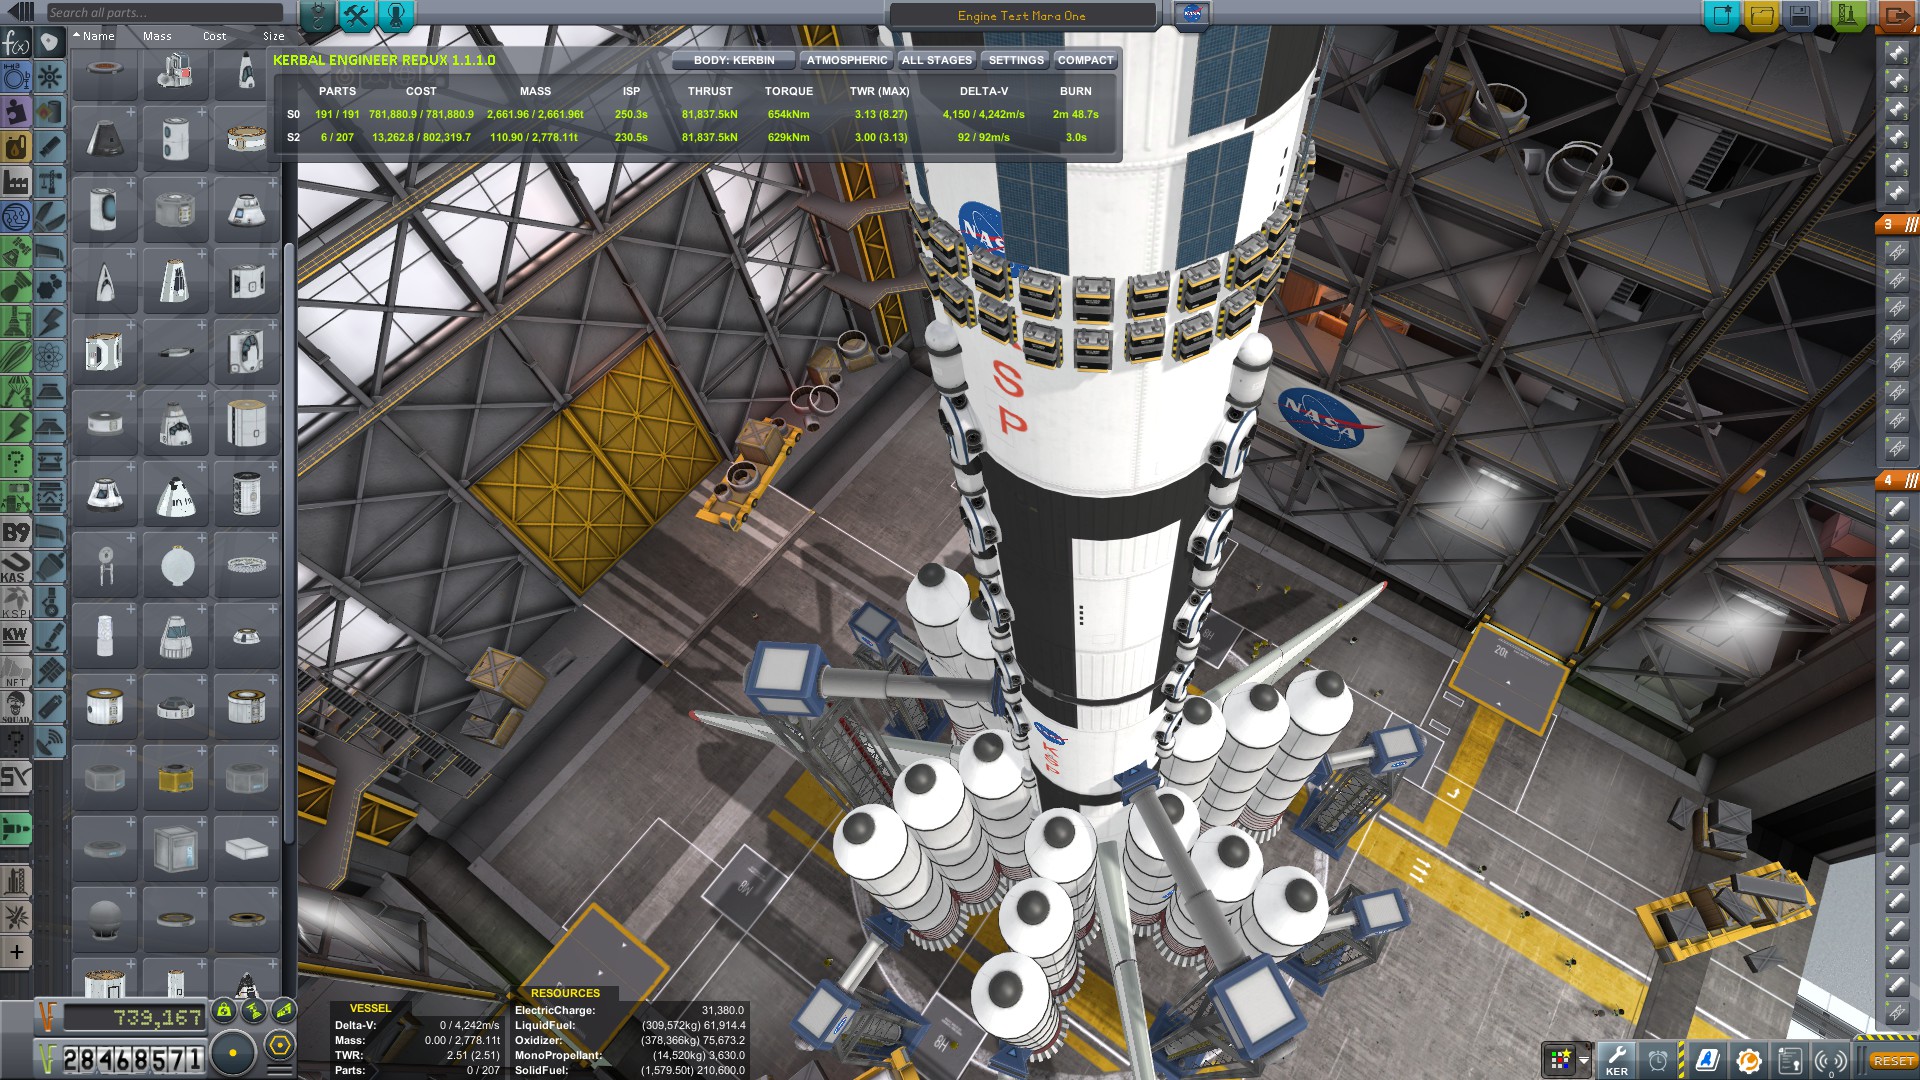 Operation Mara One Rescue   Mission Reports   Kerbal Space Program Forums